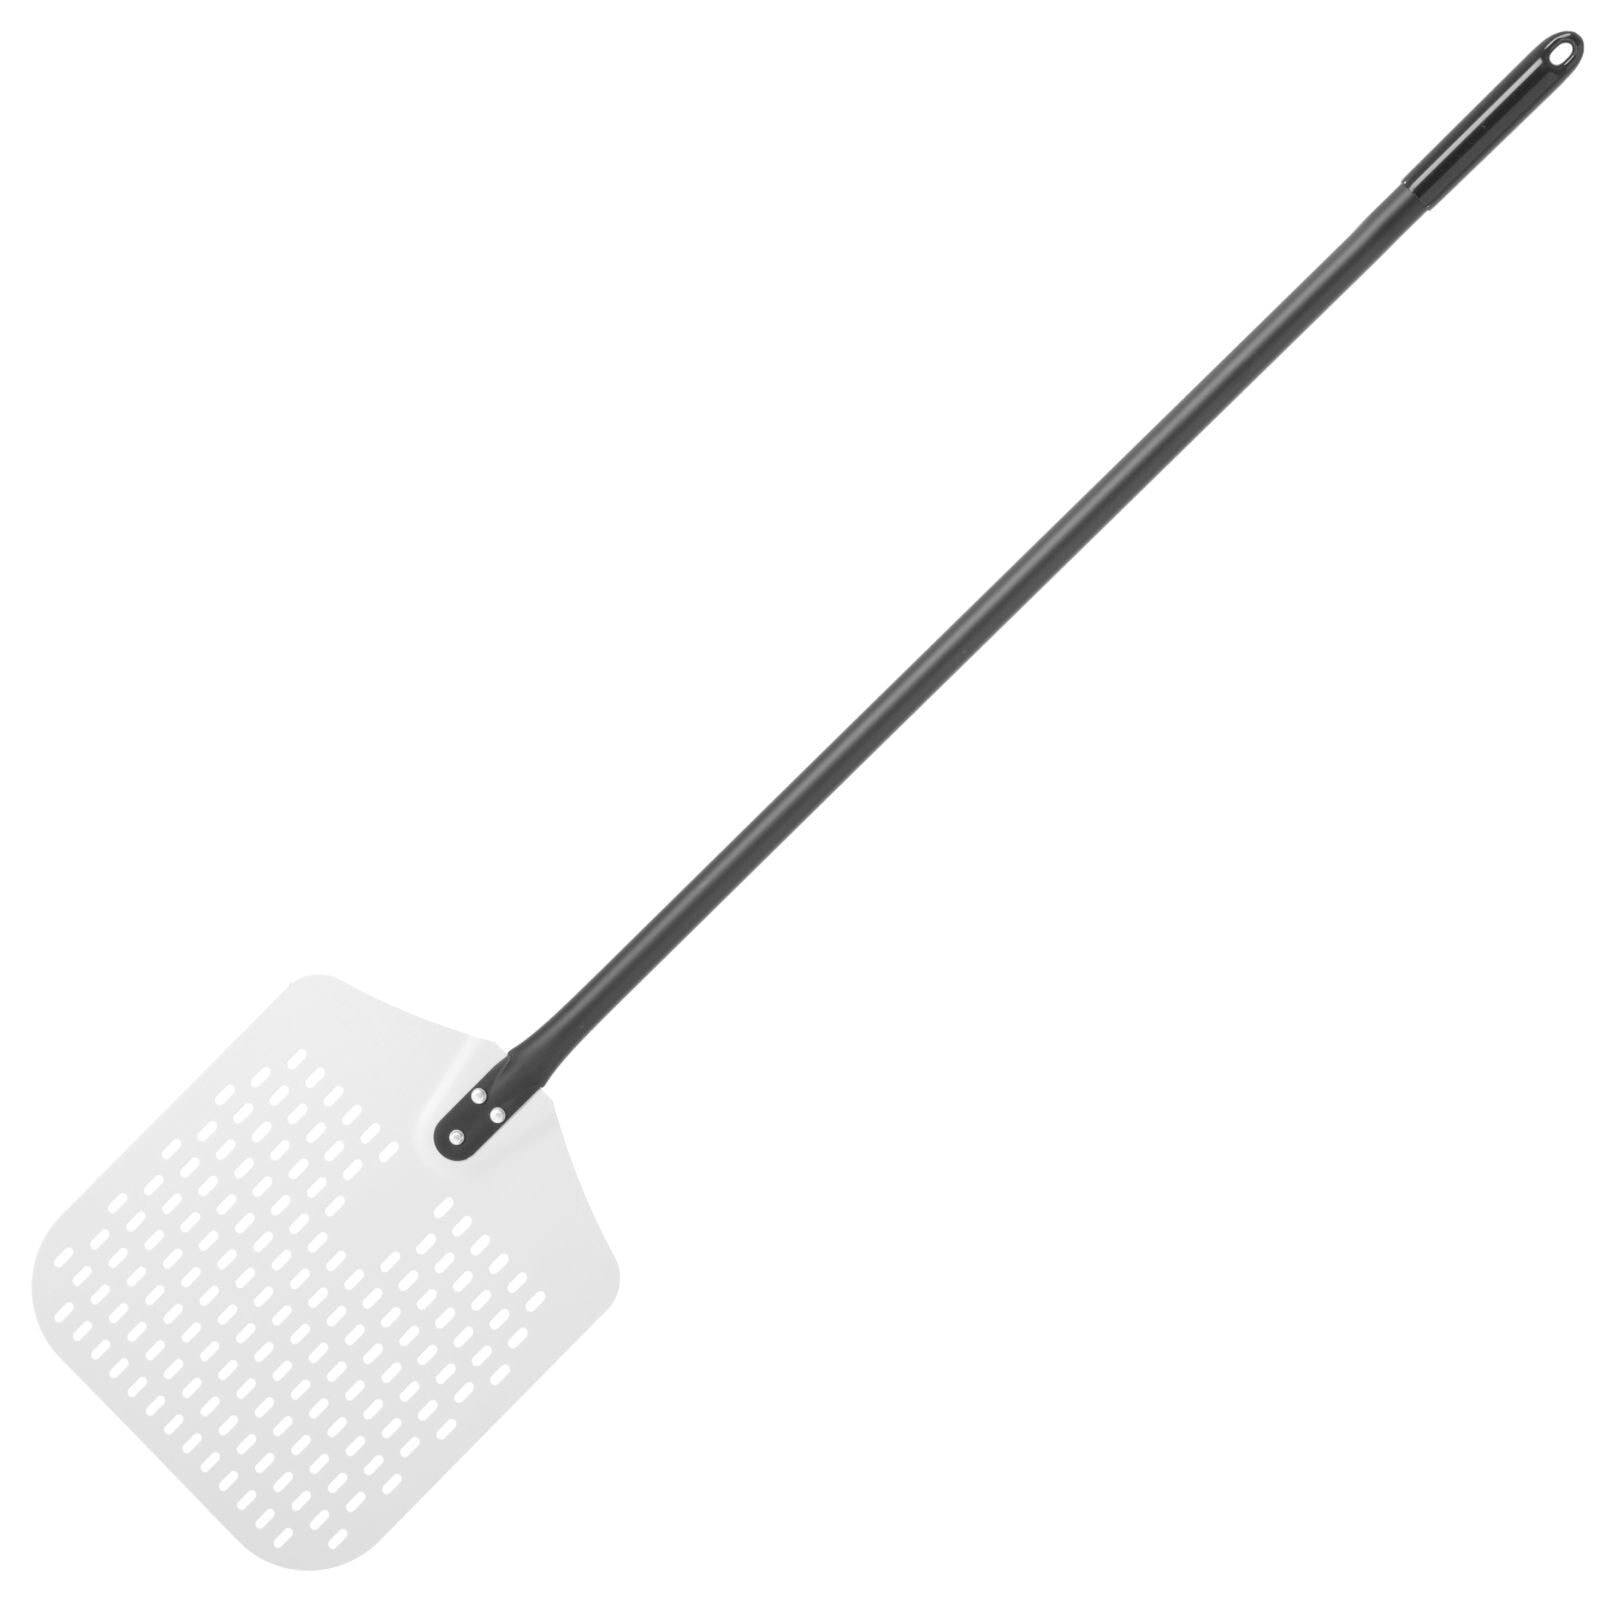 Shovel tray for removing pizza from the oven square aluminum perforated 305 x 1320 mm - Hendi 617137